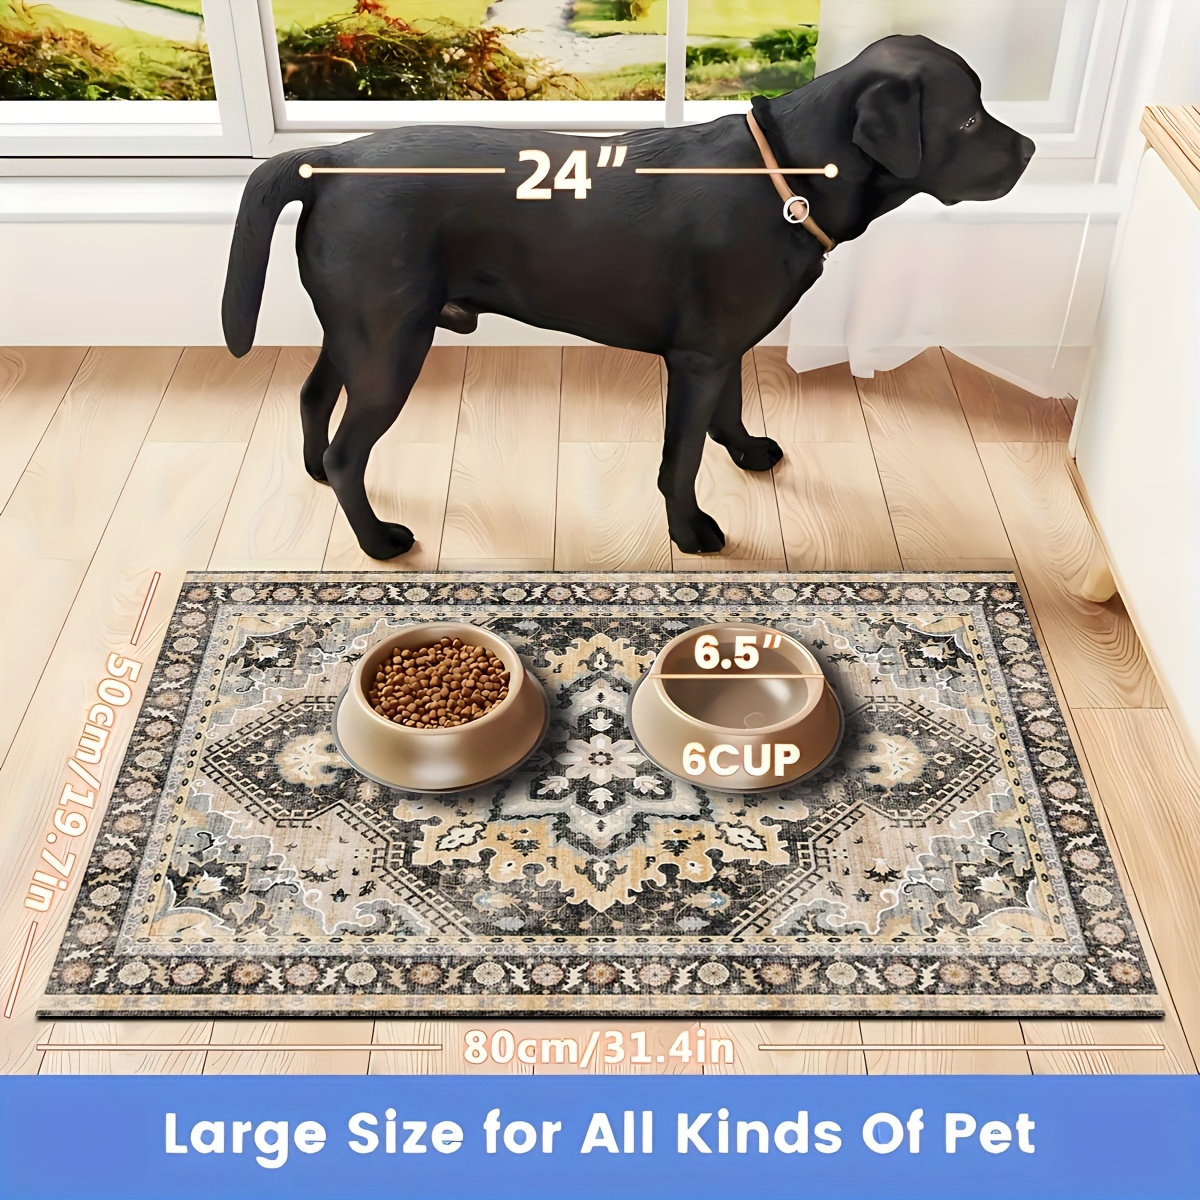 

Jit Polyester Pet Feeding Mat For Dogs - Waterproof, Non-slip Dog Food Bowl Placemat, Durable And Easy To Clean - Large Size For All Kinds Of Pets